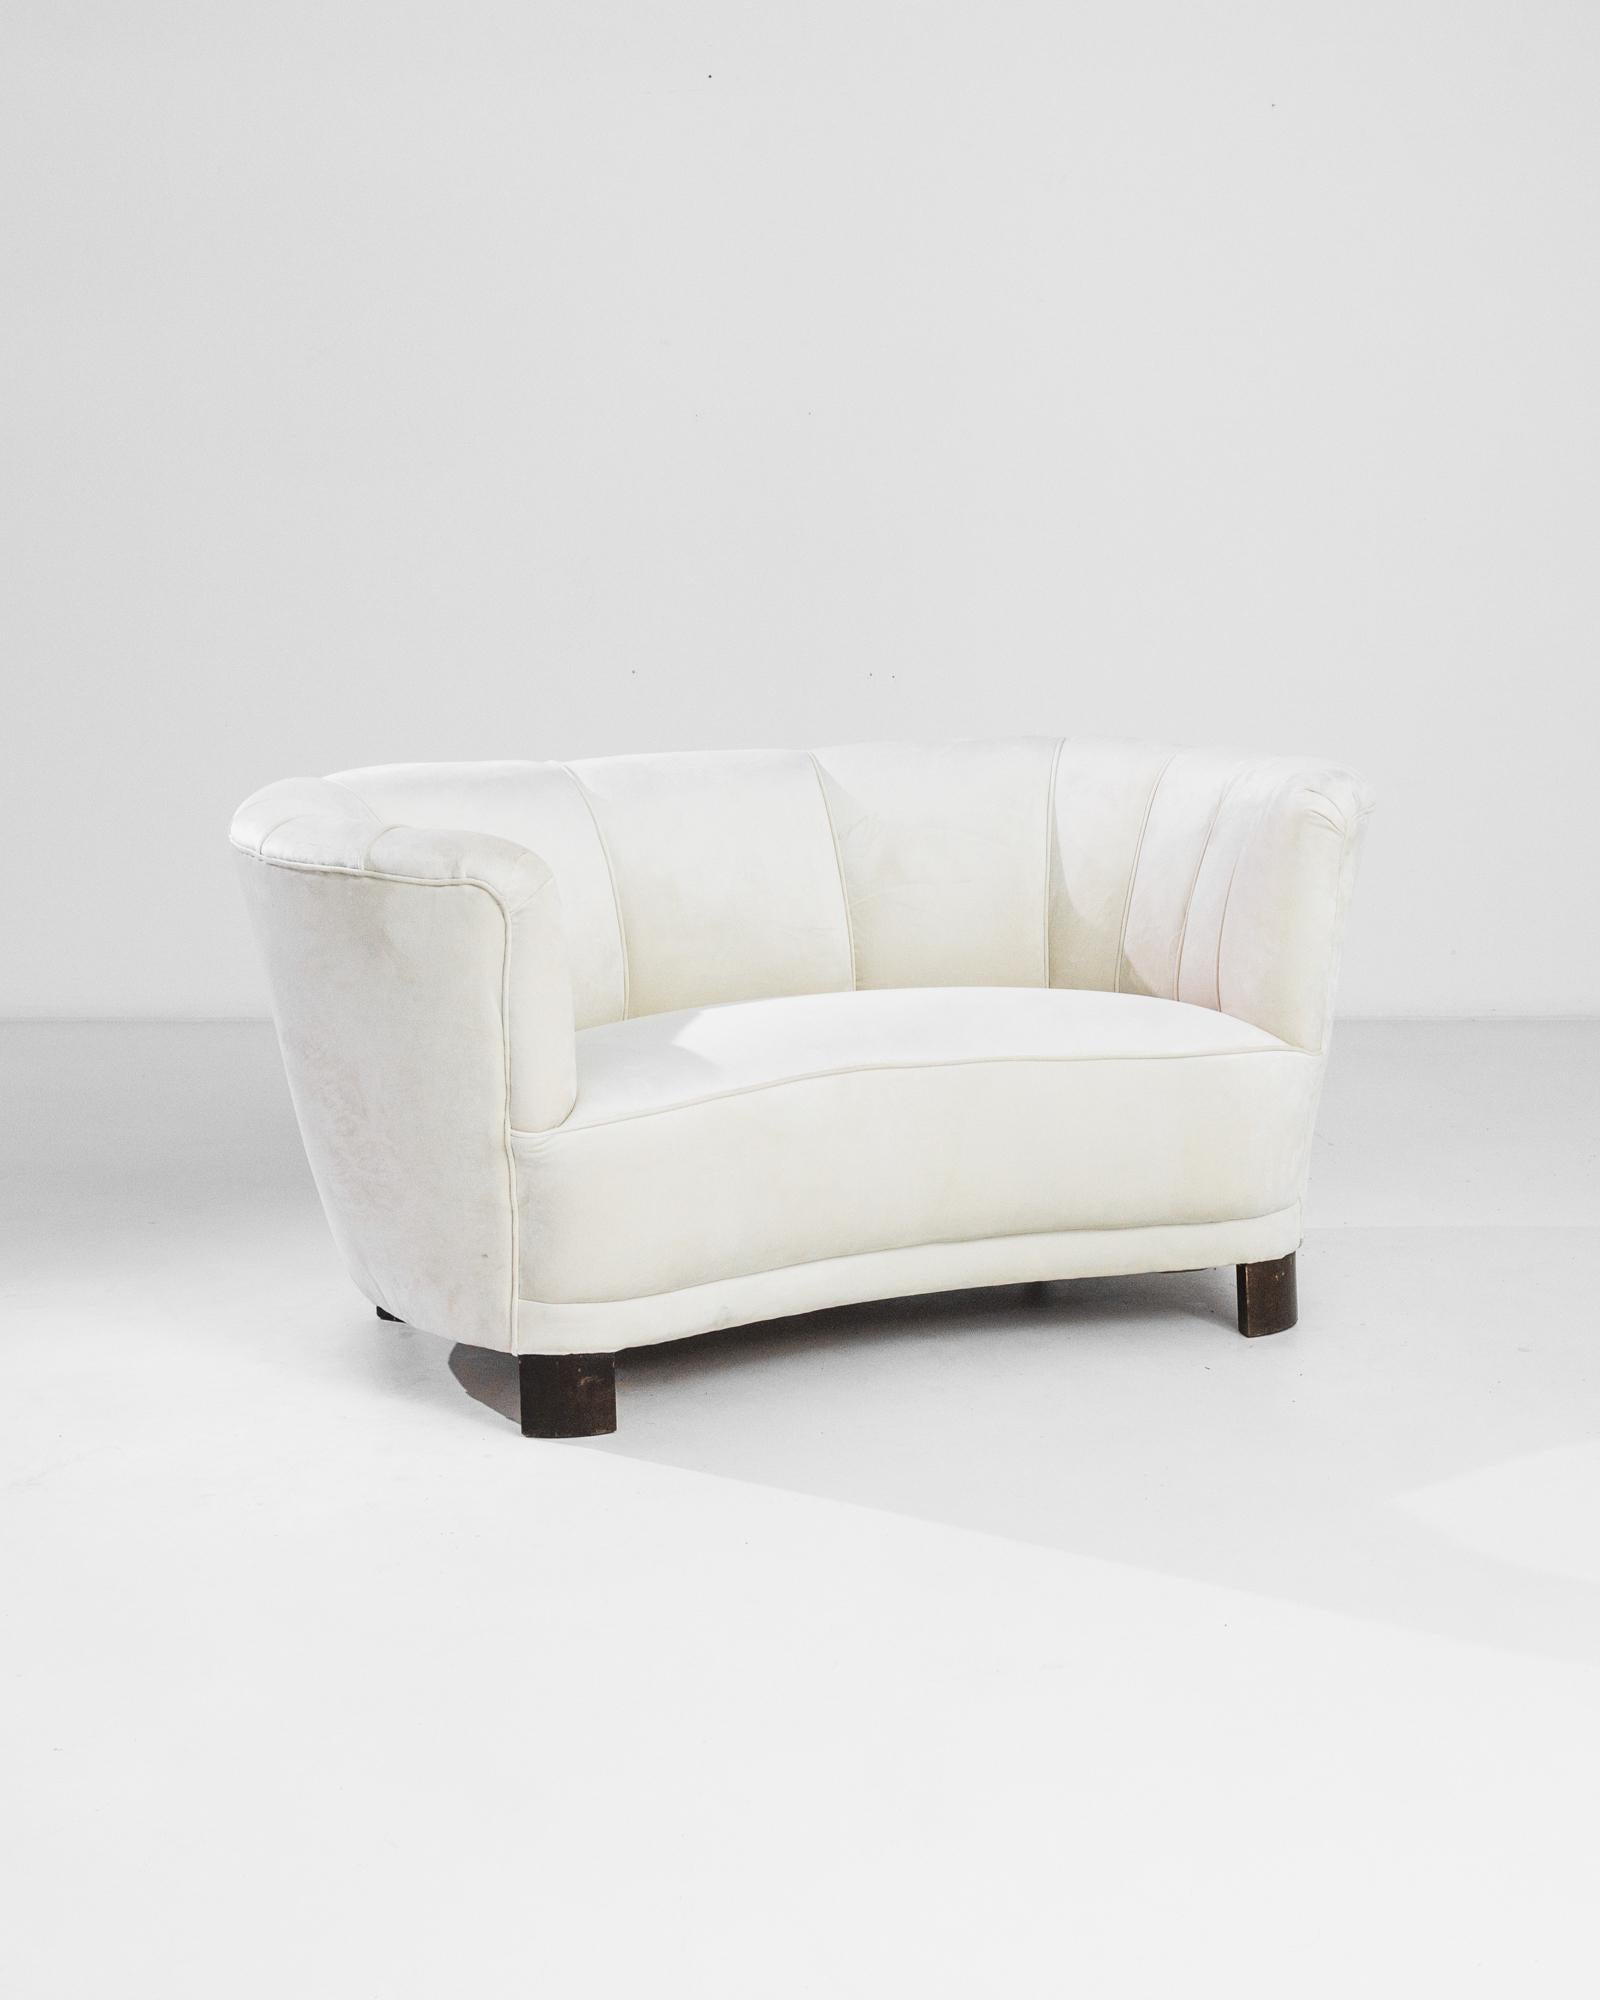 This curved sofa was produced in Denmark, circa 1930. With a solid wooden frame and refined curves, this harmoniously shaped sofa imparts a luxurious elegance. Fully upholstered with a cream fabric, its suede texture calls for a comfortable stay-in